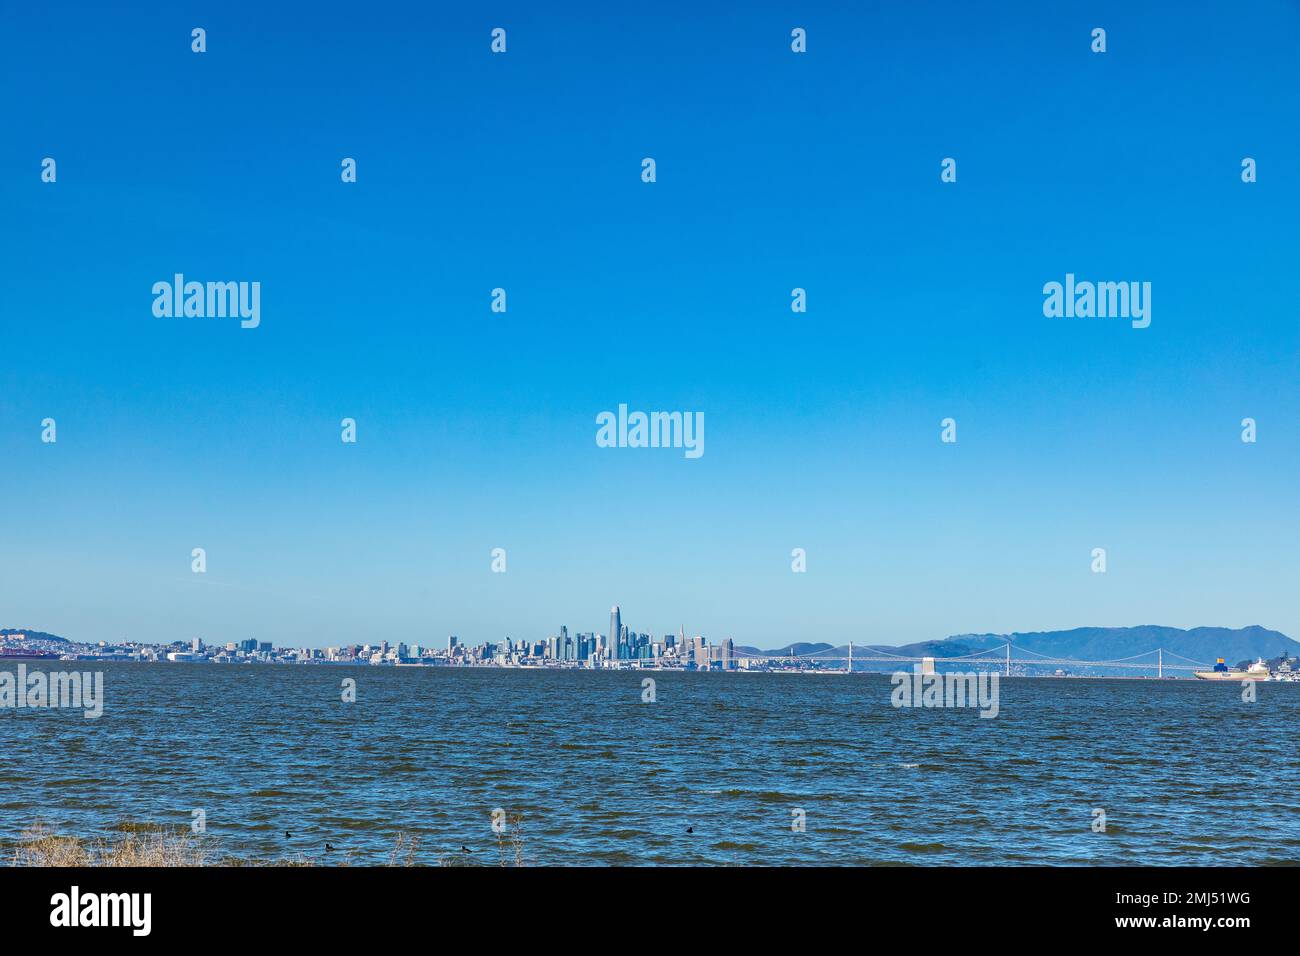 The San Francisco Skyline From Alameda California on January 22 2023 the beginning of Tet and Chinese New year and also at the peak of King tide. Stock Photo